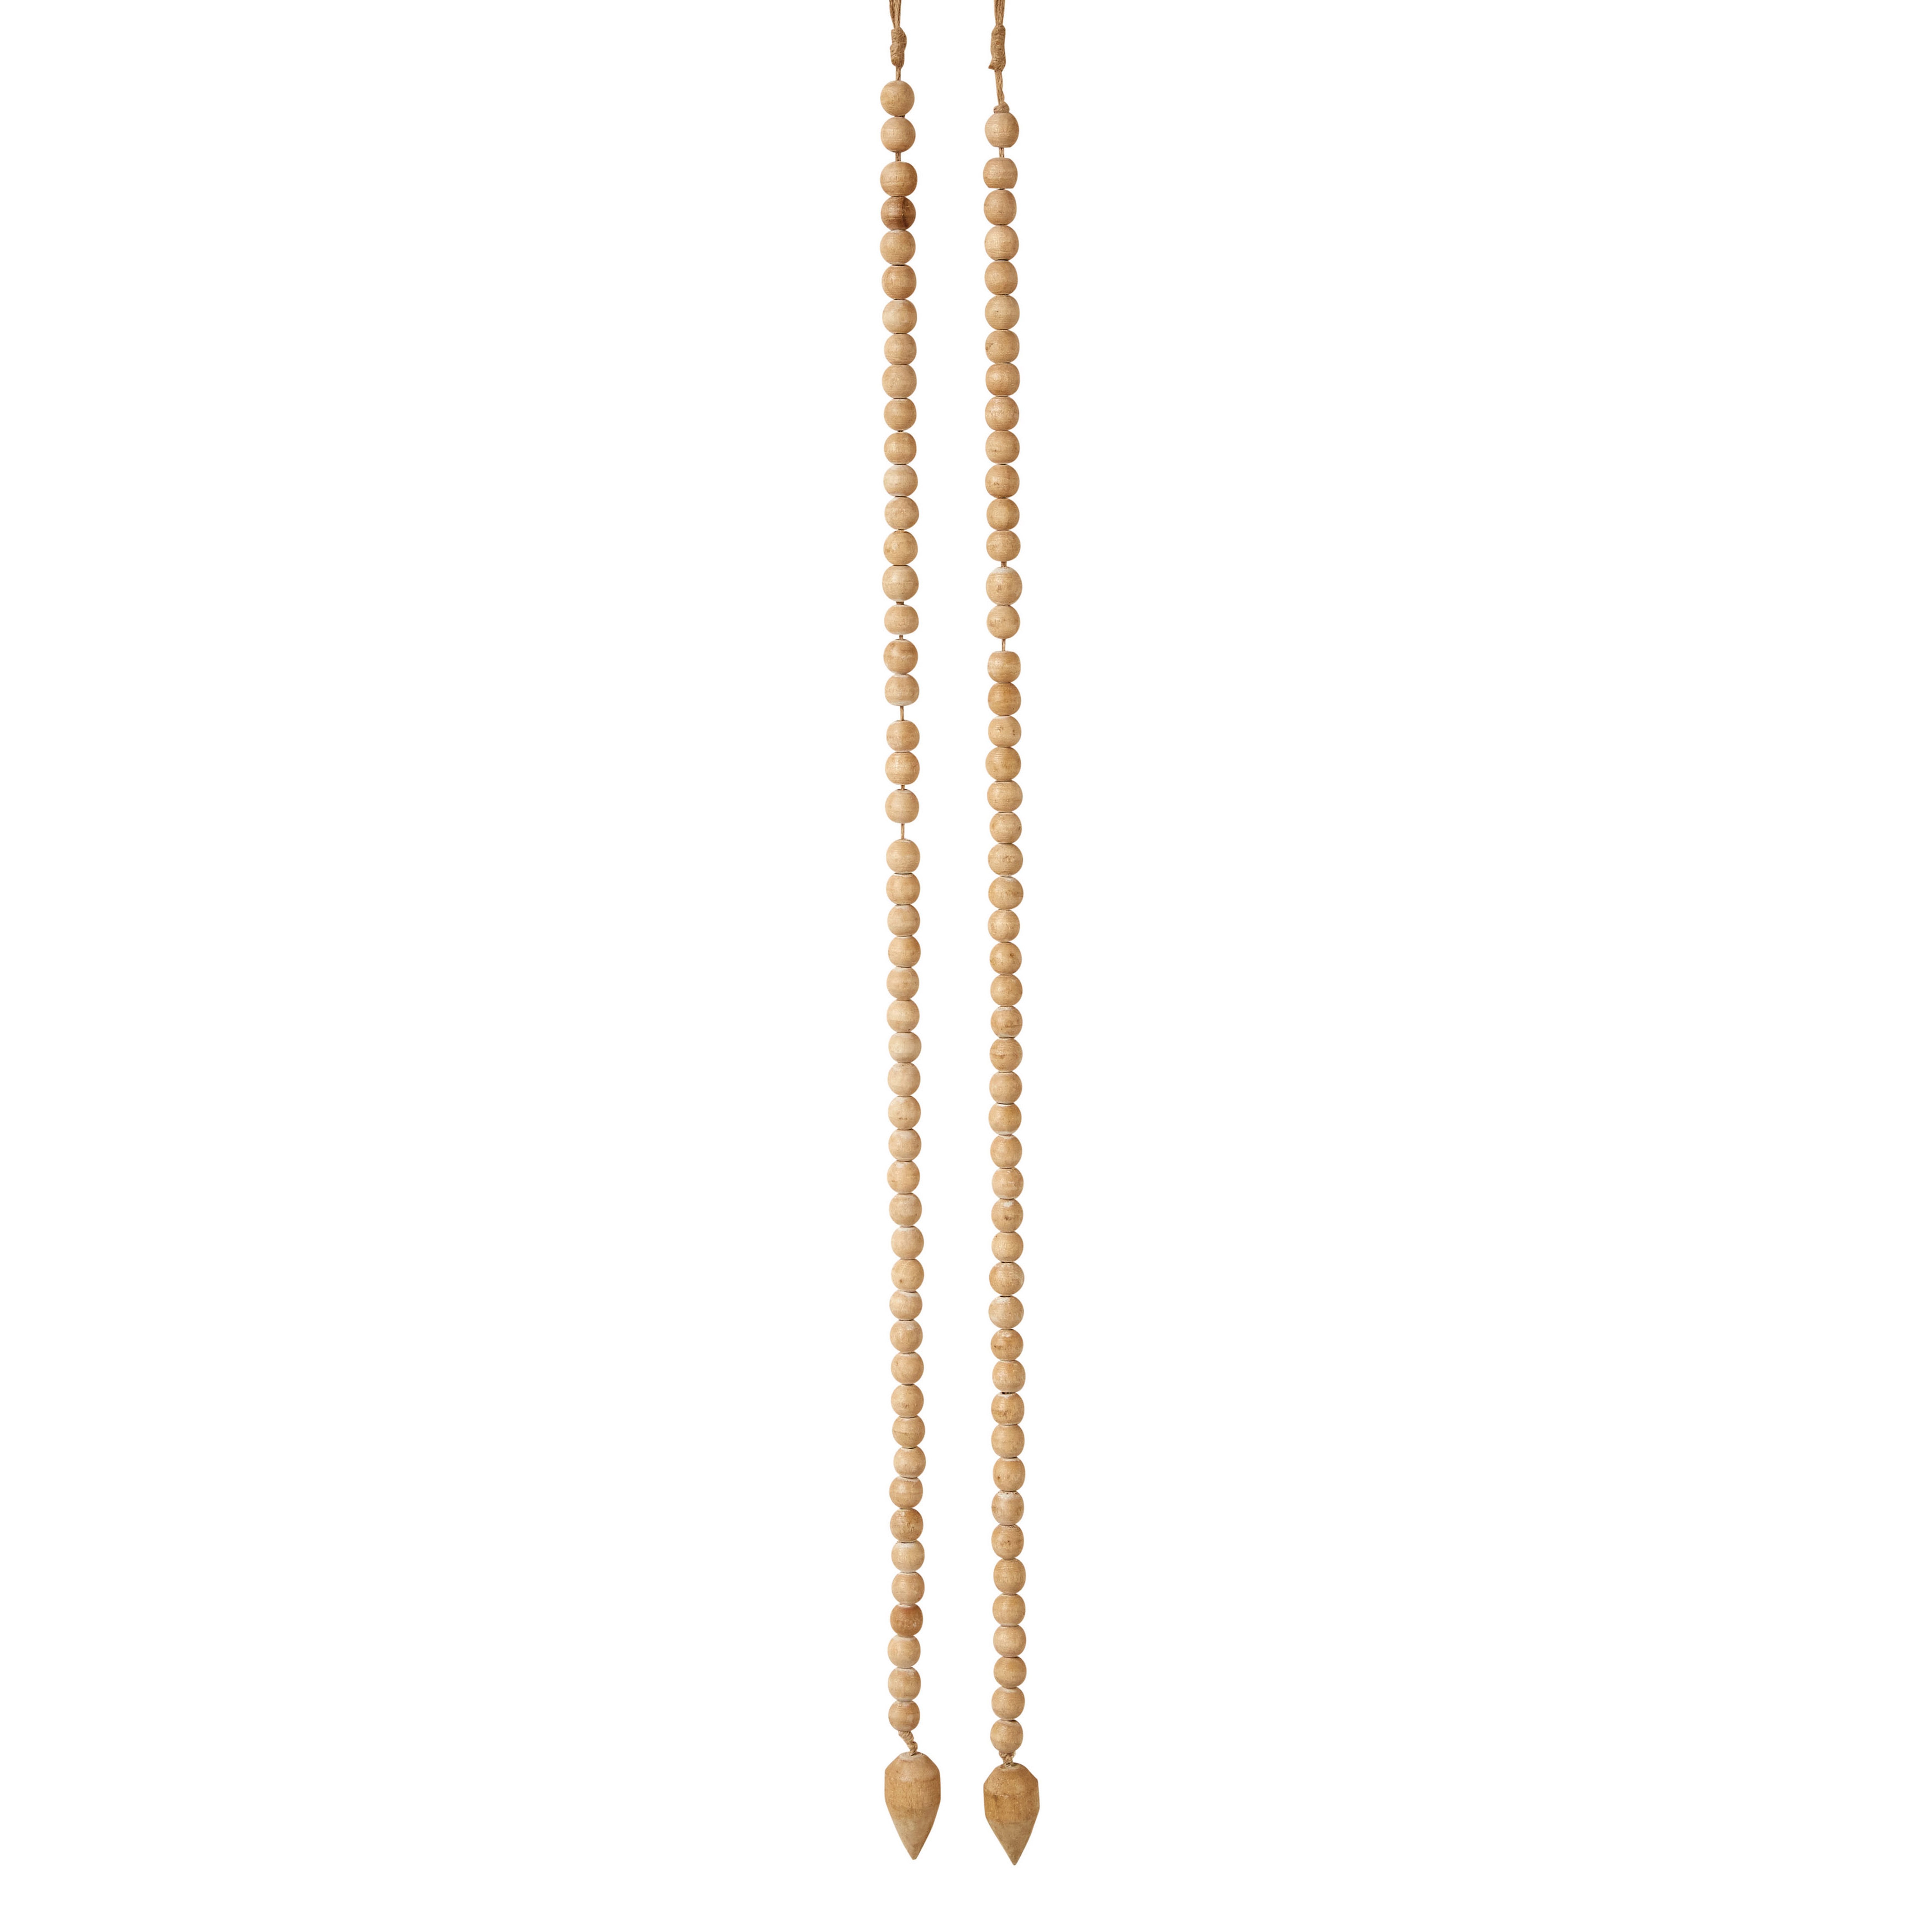 Wood Bead Garland with Pointed Ends - Nomad Home